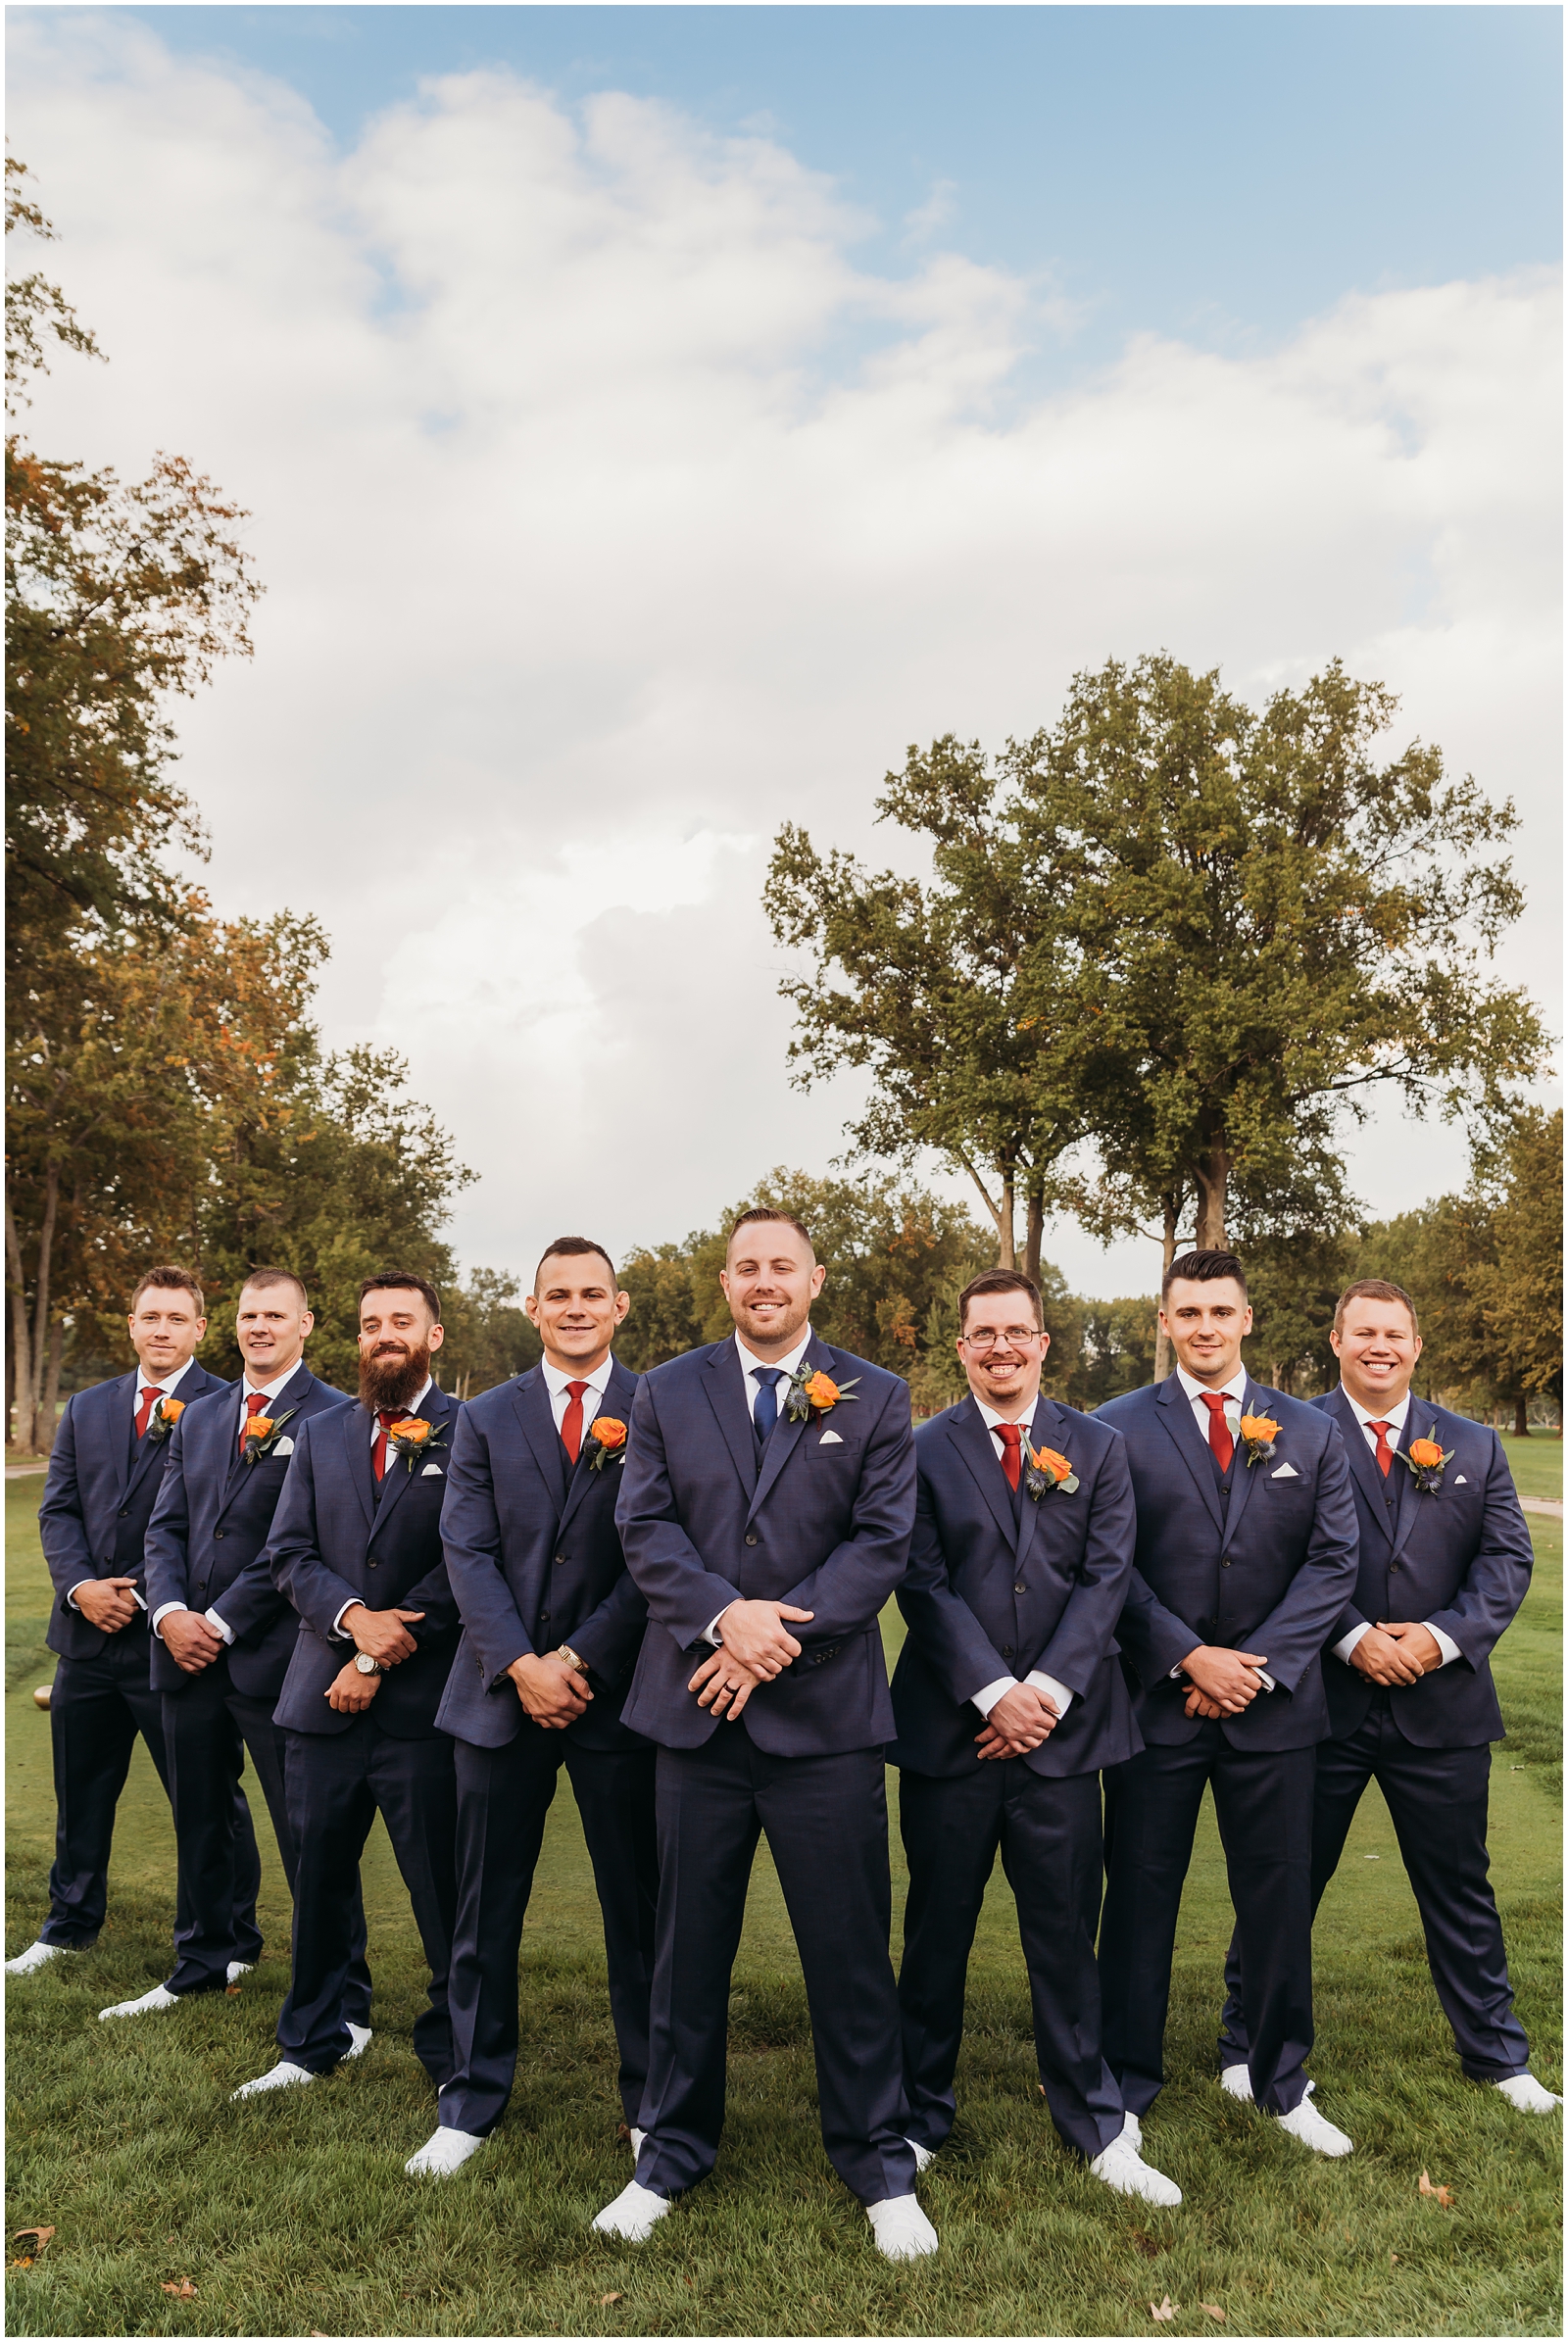 Wedding party portraits at Avon Oaks Country Club